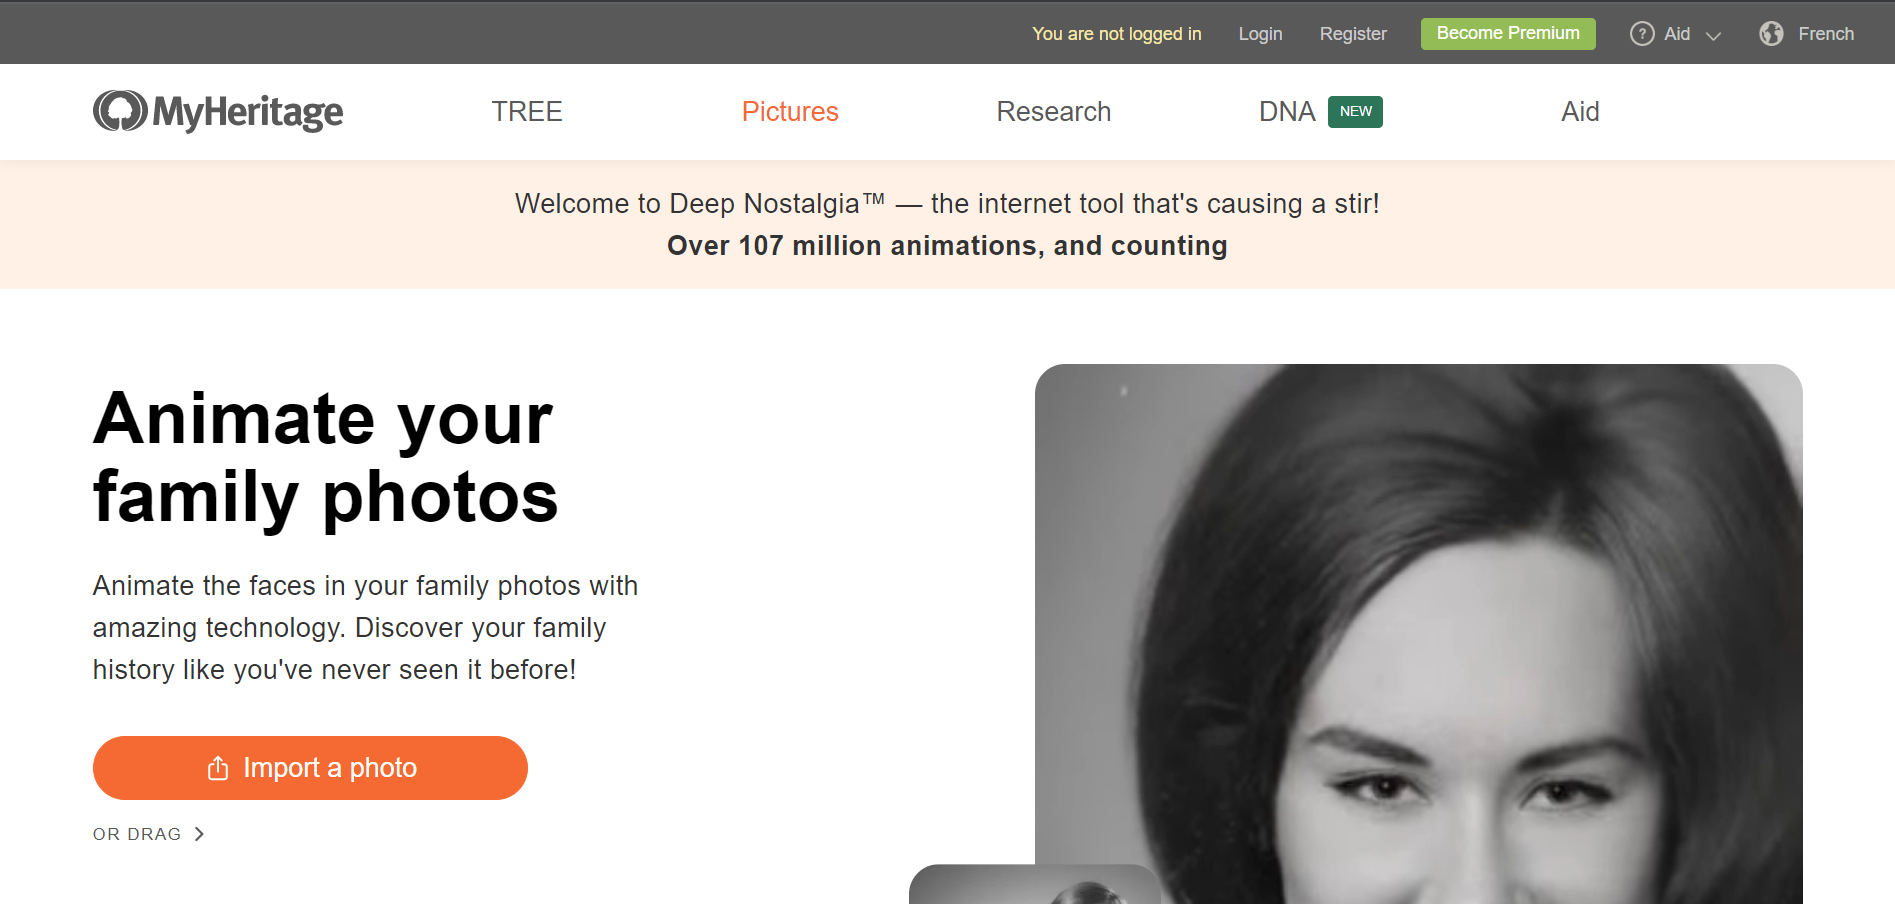 Bring Your Family History to Life with MyHeritage’s Deep Nostalgia™ Technology